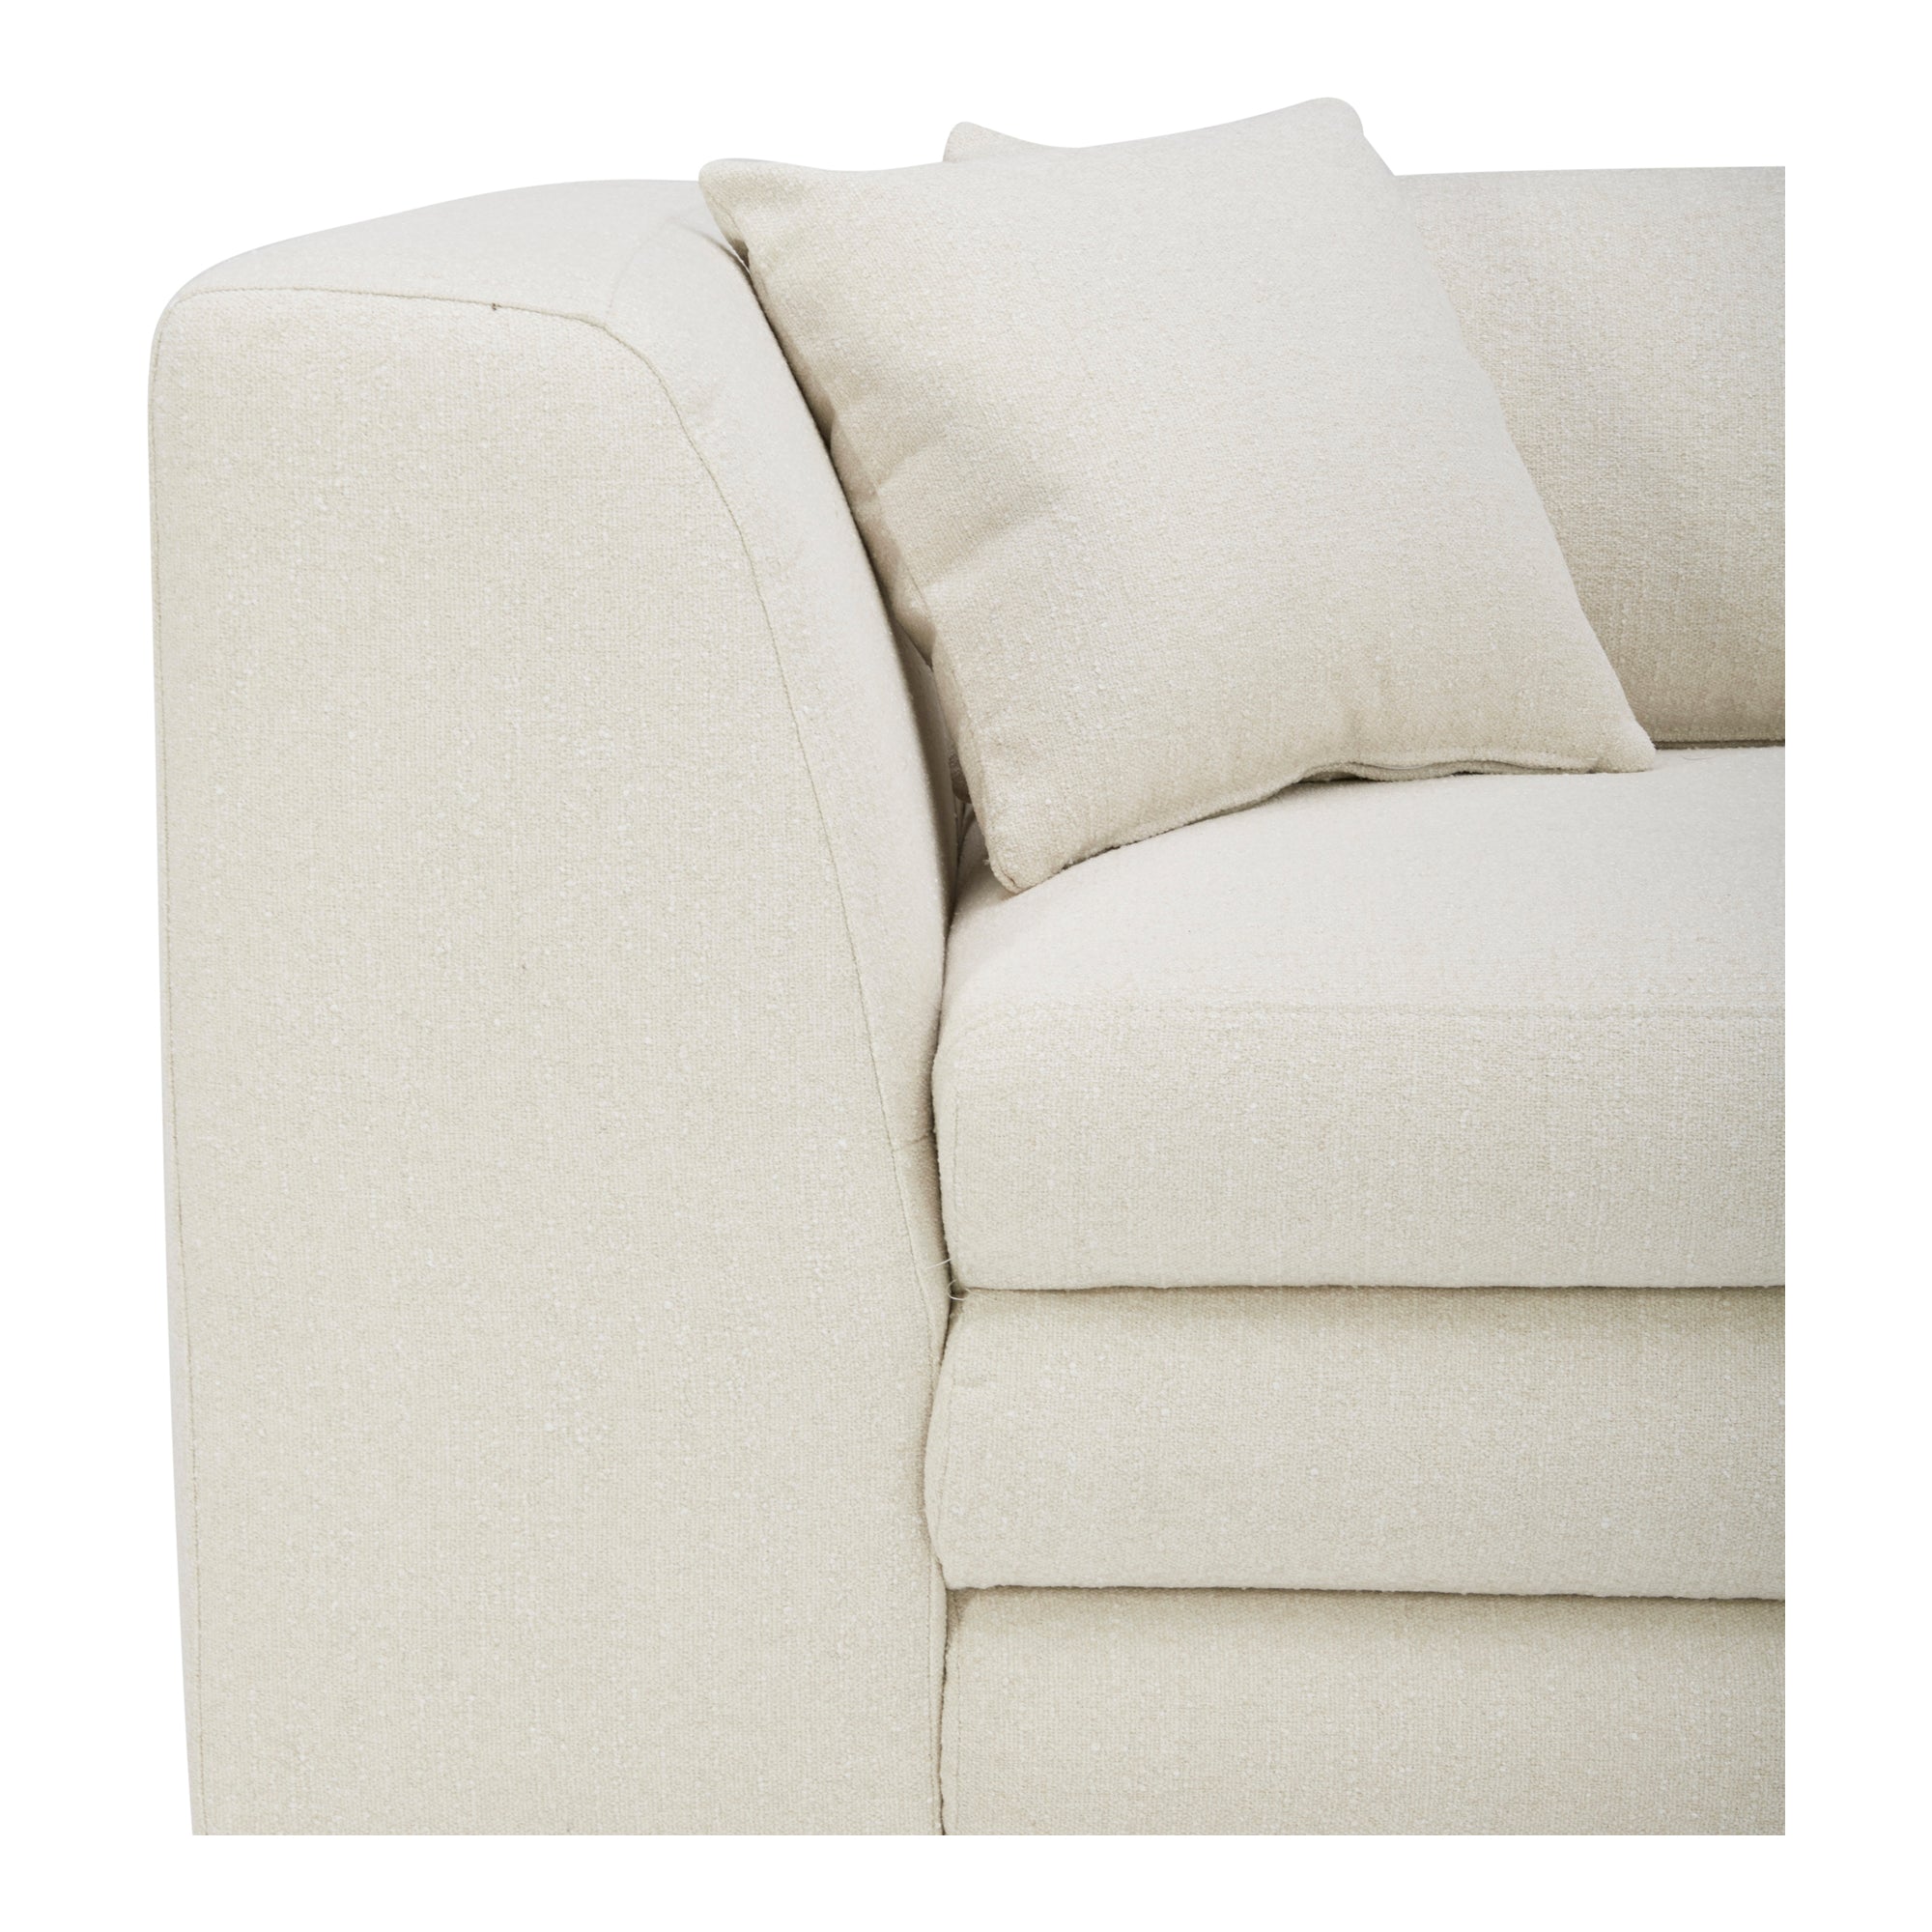 Lowtide Classic L-Shaped Modular Sectional Warm White